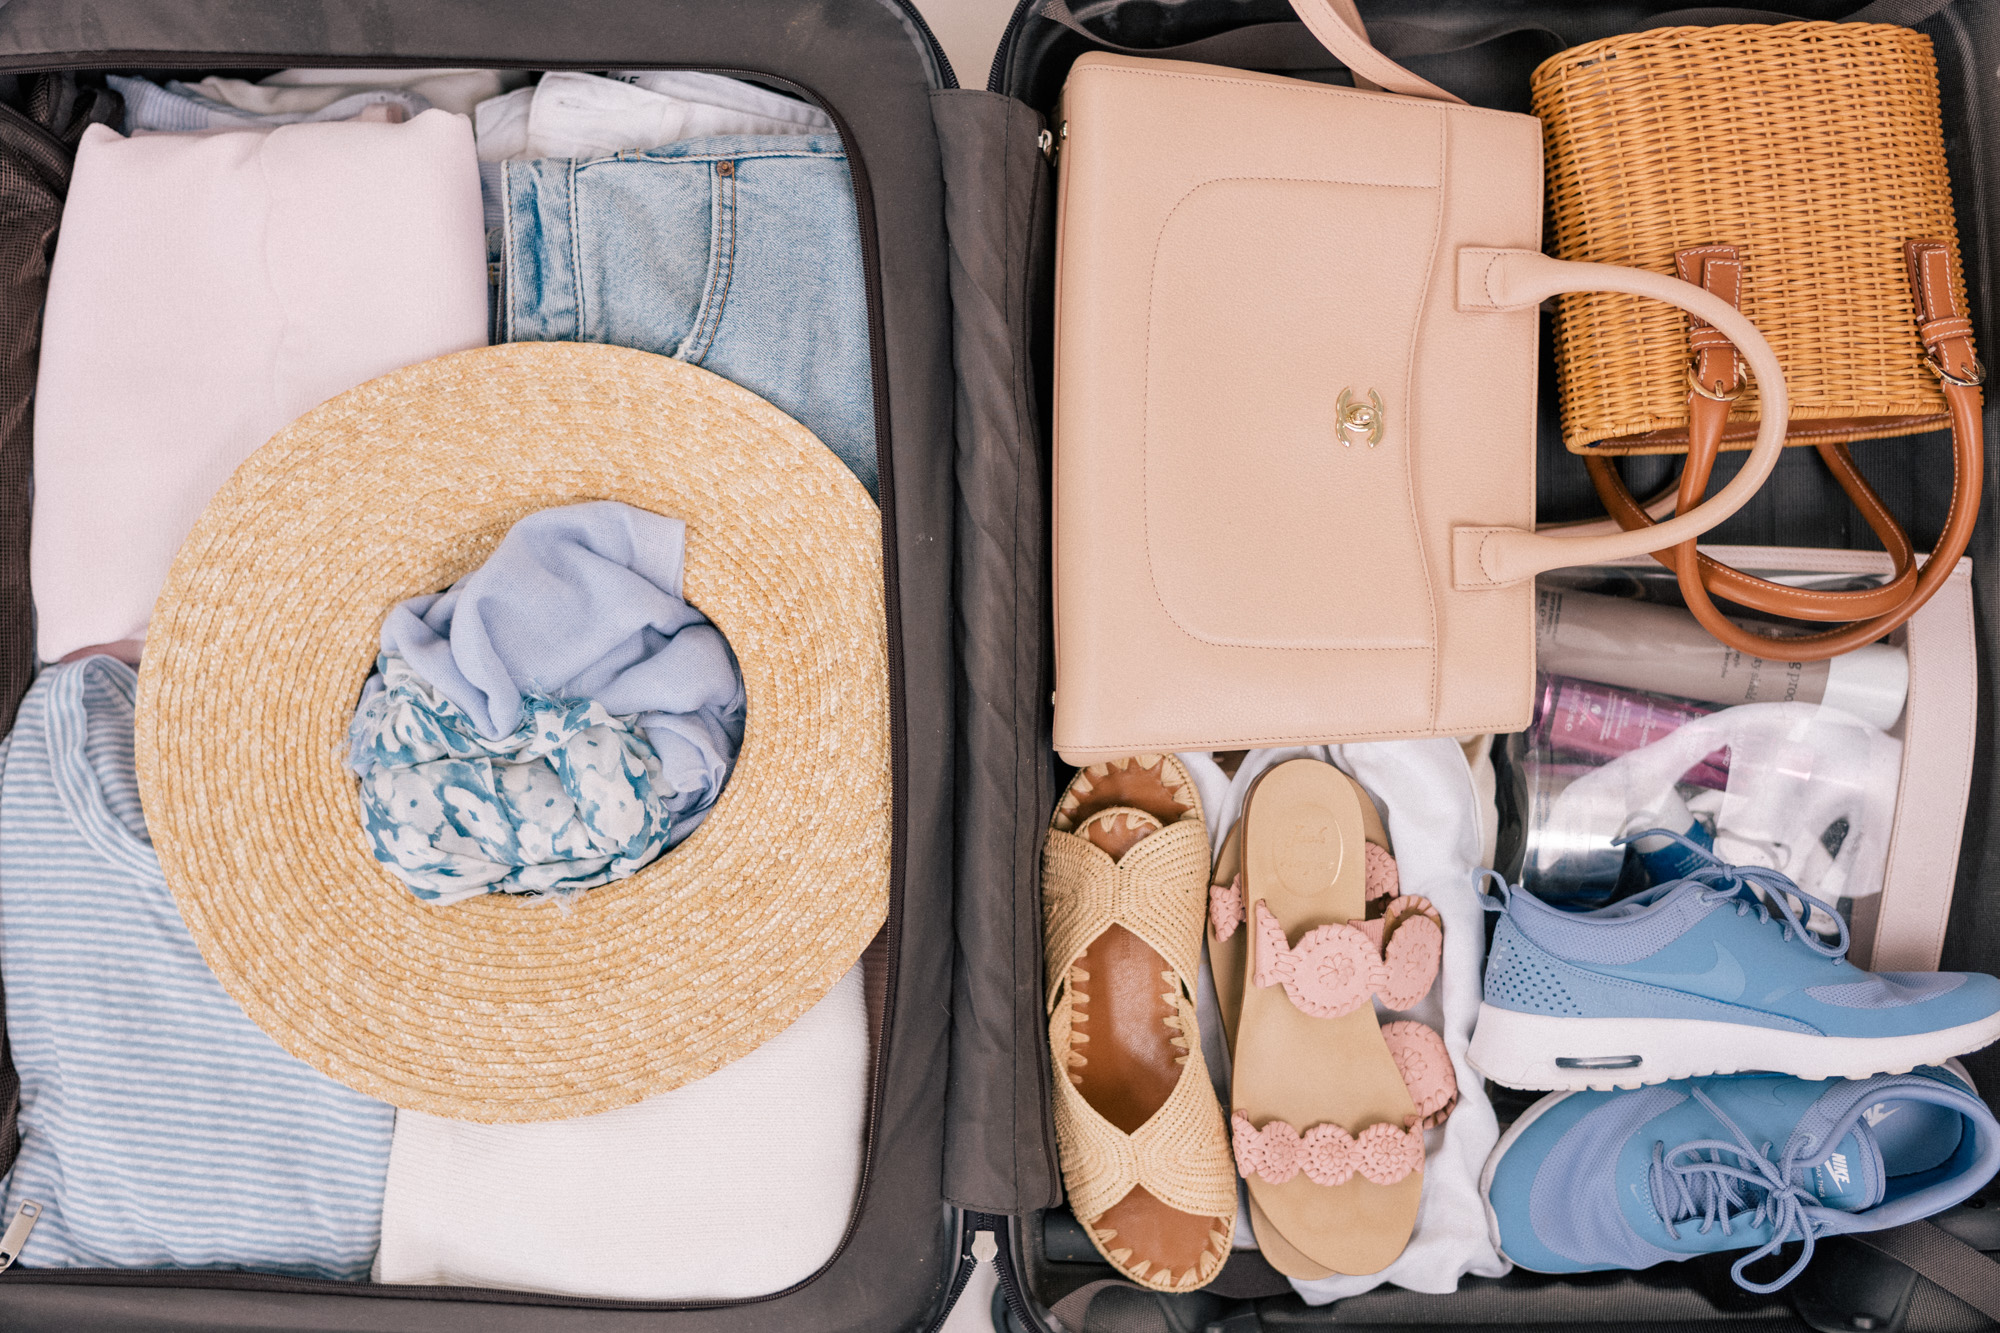 gmg-how-i-pack-my-suitcases-1003784